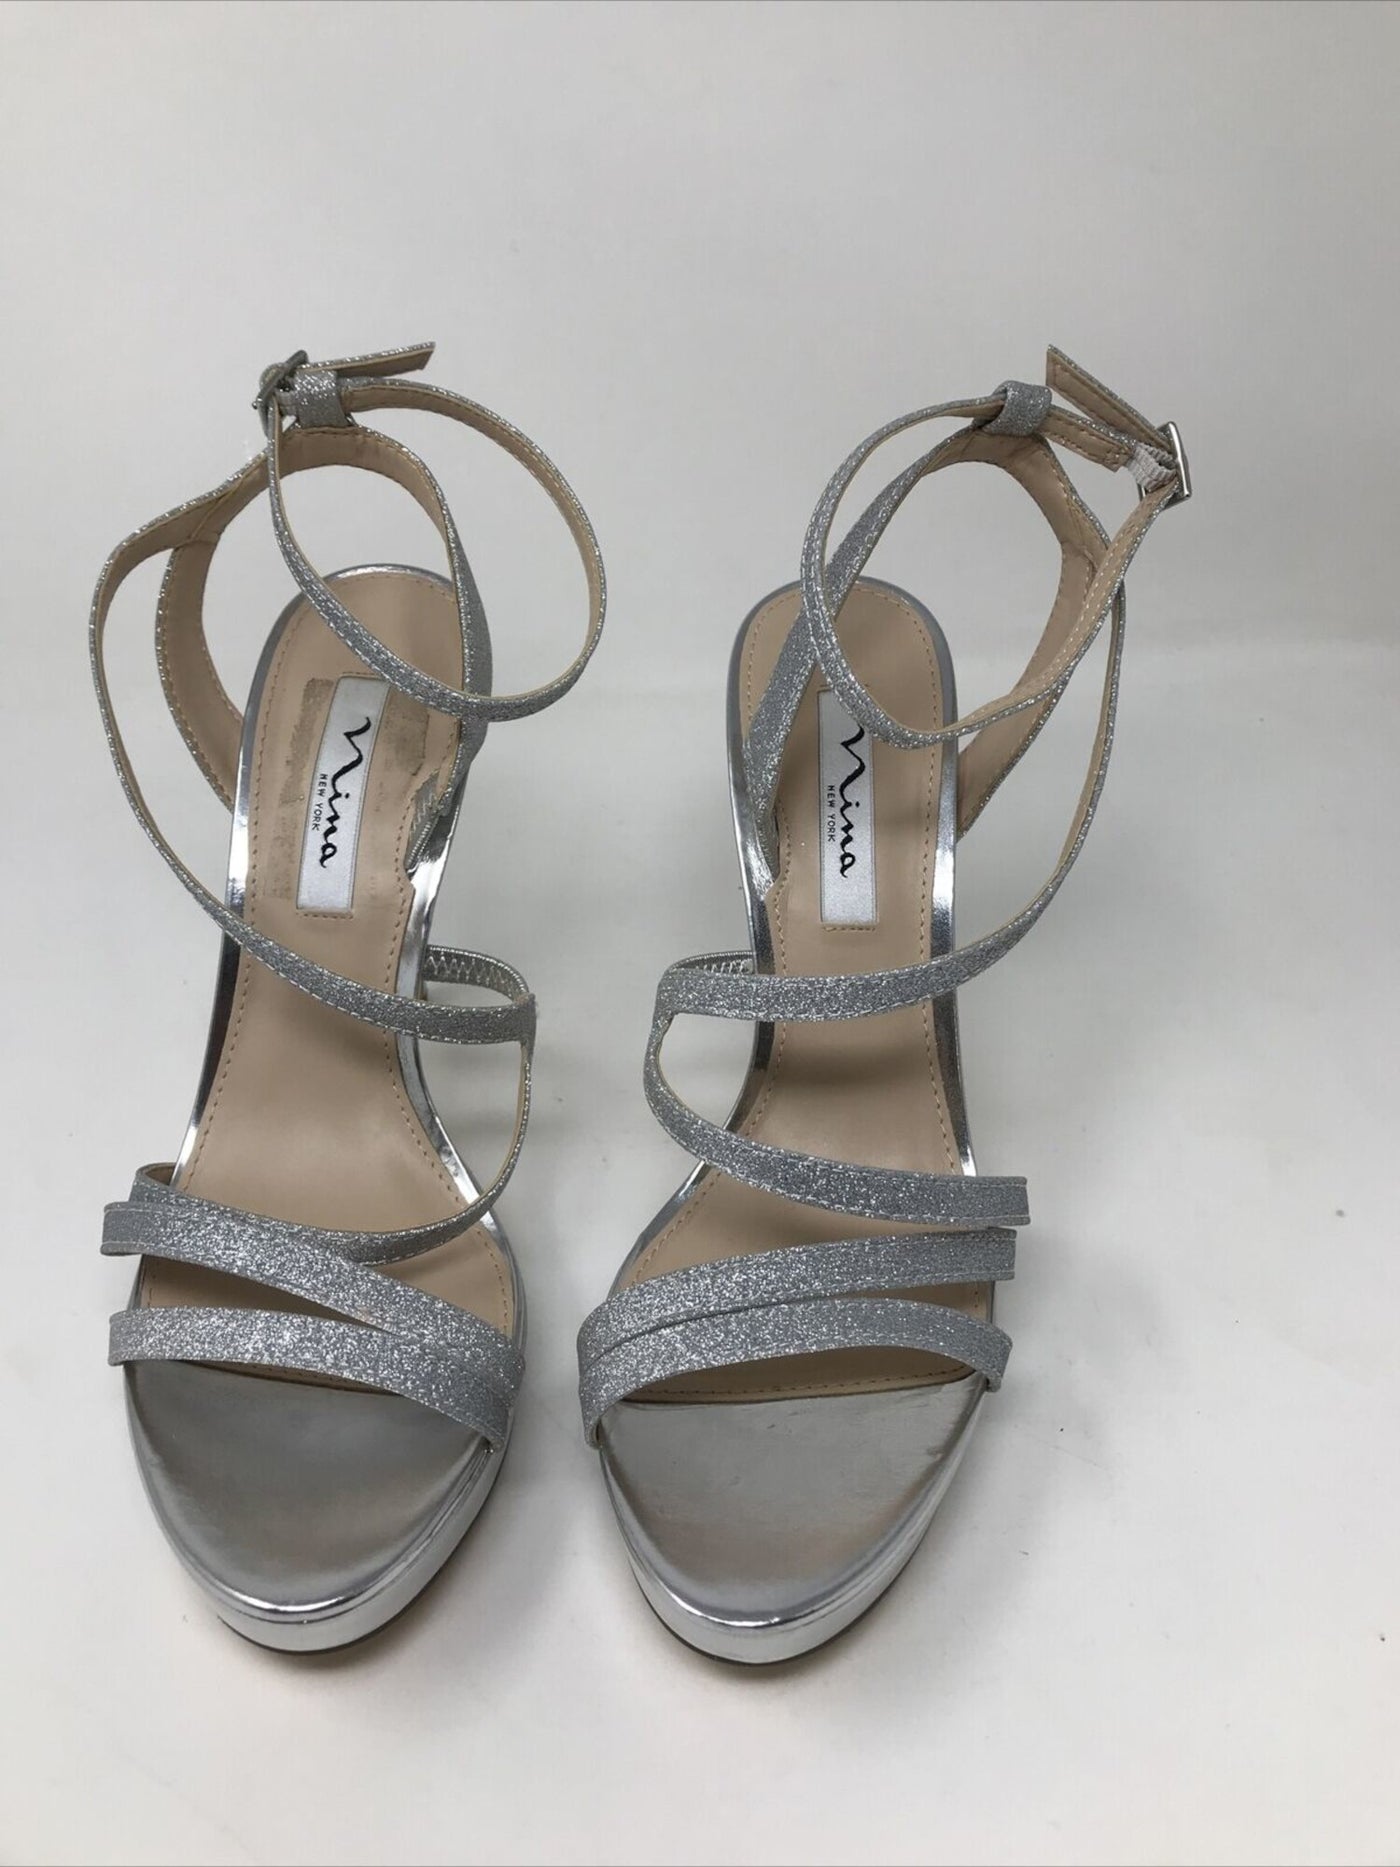 NINA Womens Silver 1" Platform Cushioned Strappy Almond Toe Stiletto Buckle Dress Sandals Shoes 10